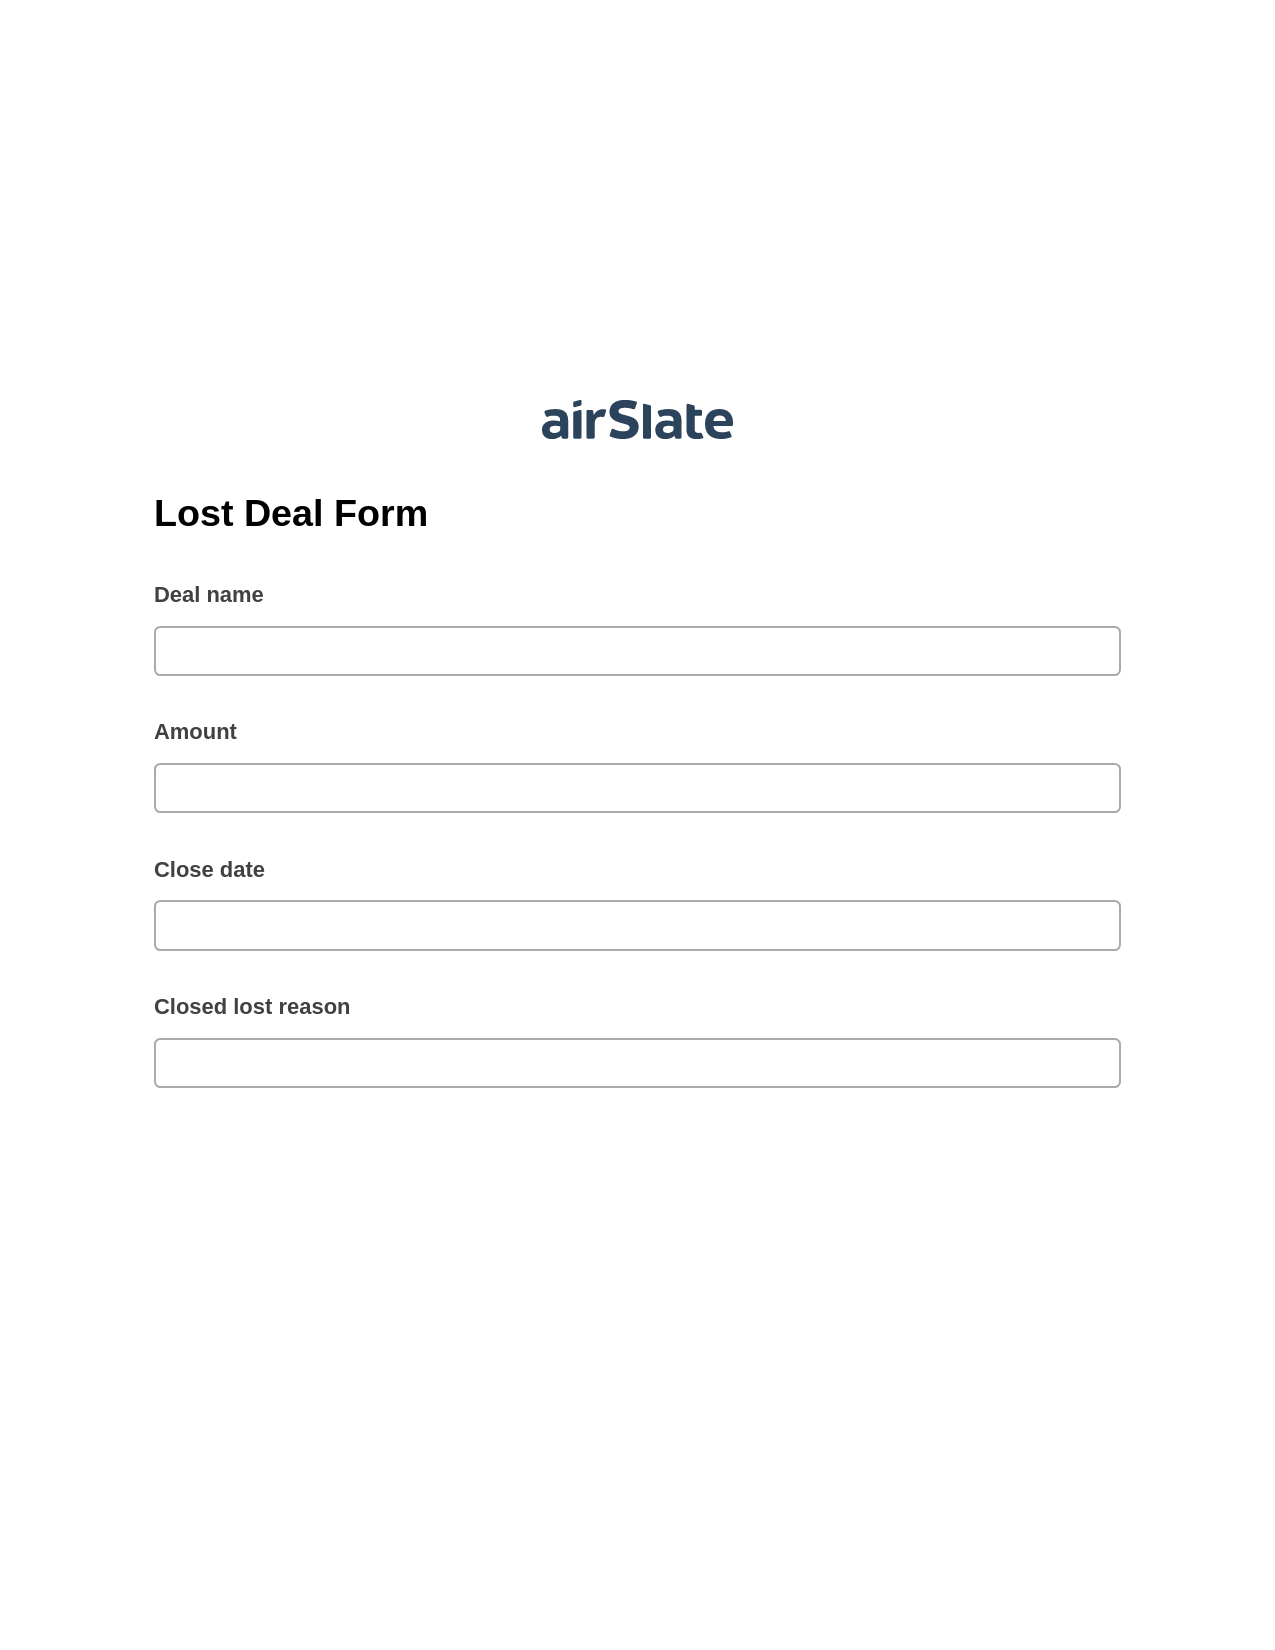 Lost Deal Form Pre-fill from Salesforce Records with SOQL Bot, Update Salesforce Records Bot, Archive to Google Drive Bot